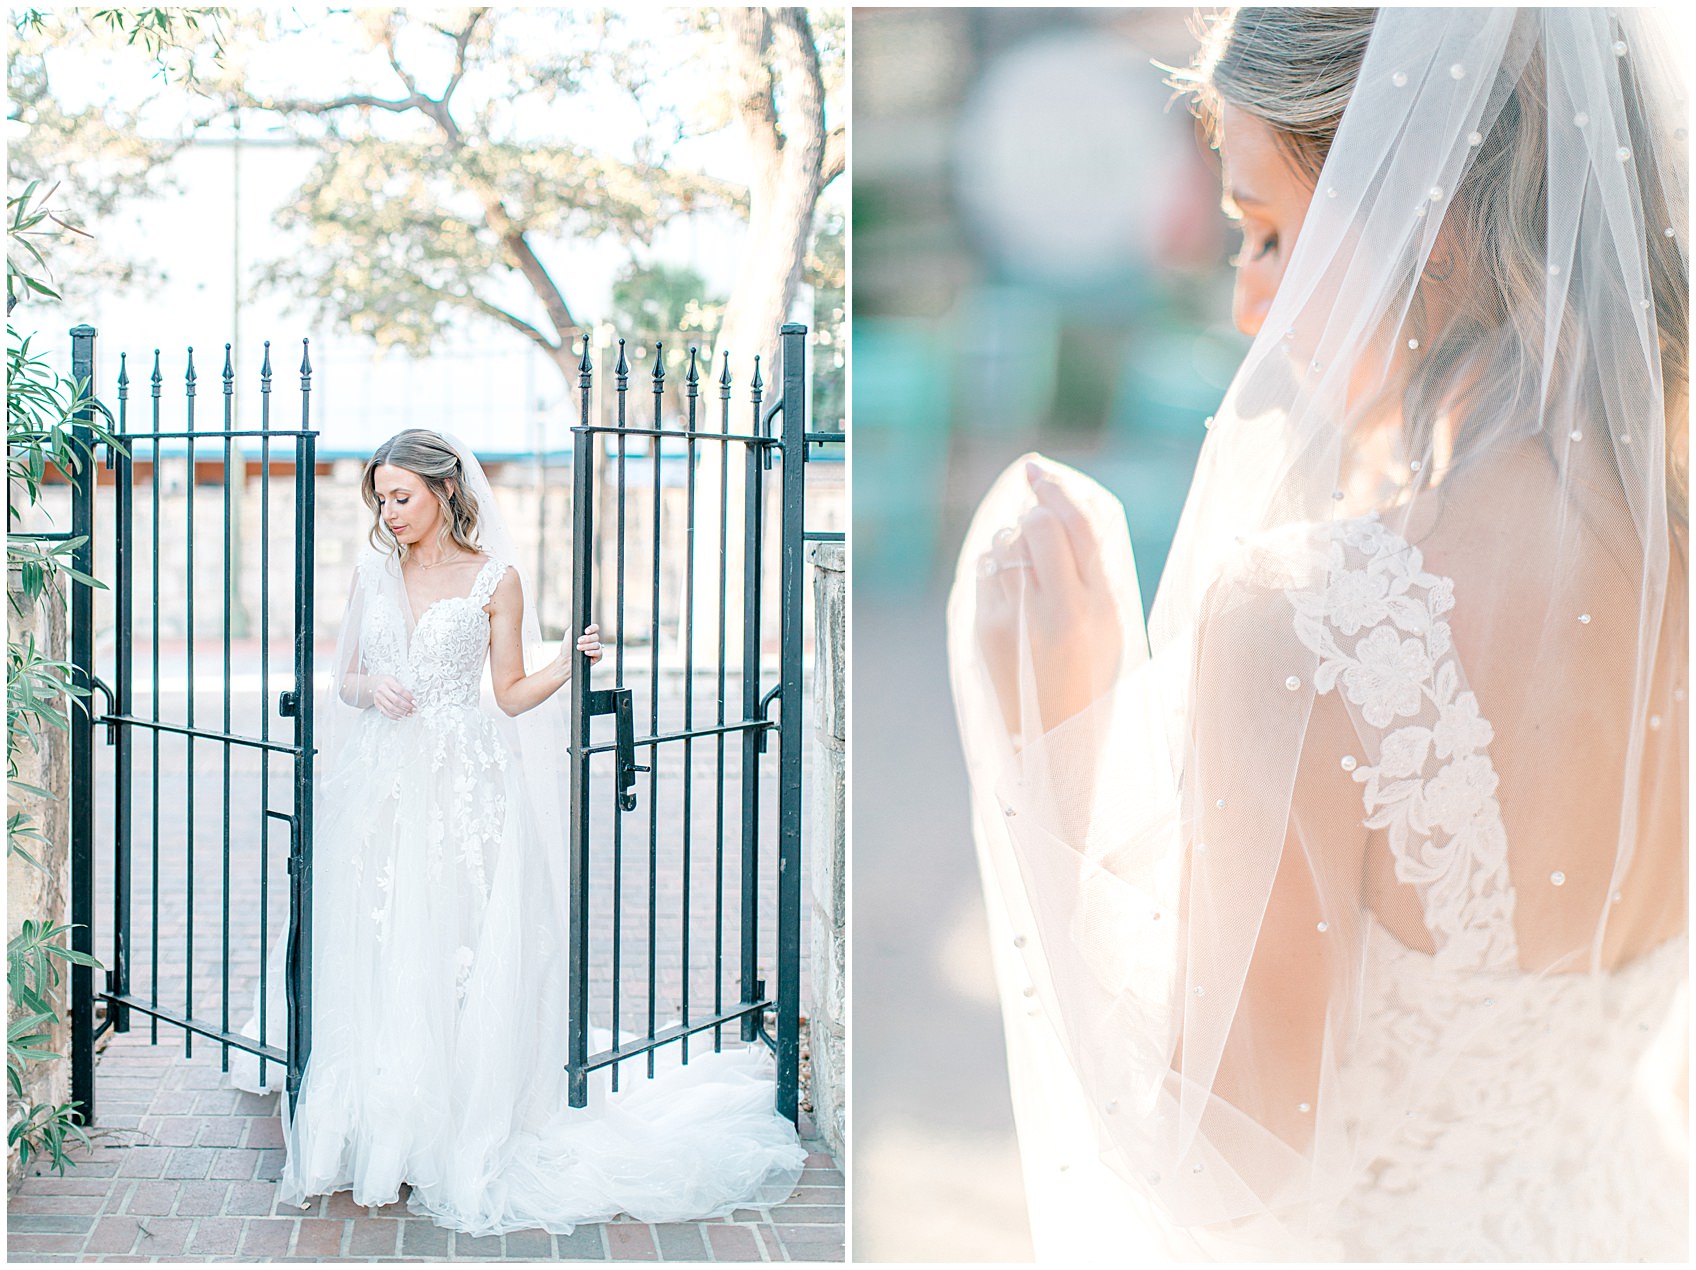 Downtown San Antonio Bridal Photography Session by Allison Jeffers Wedding Photography 0019